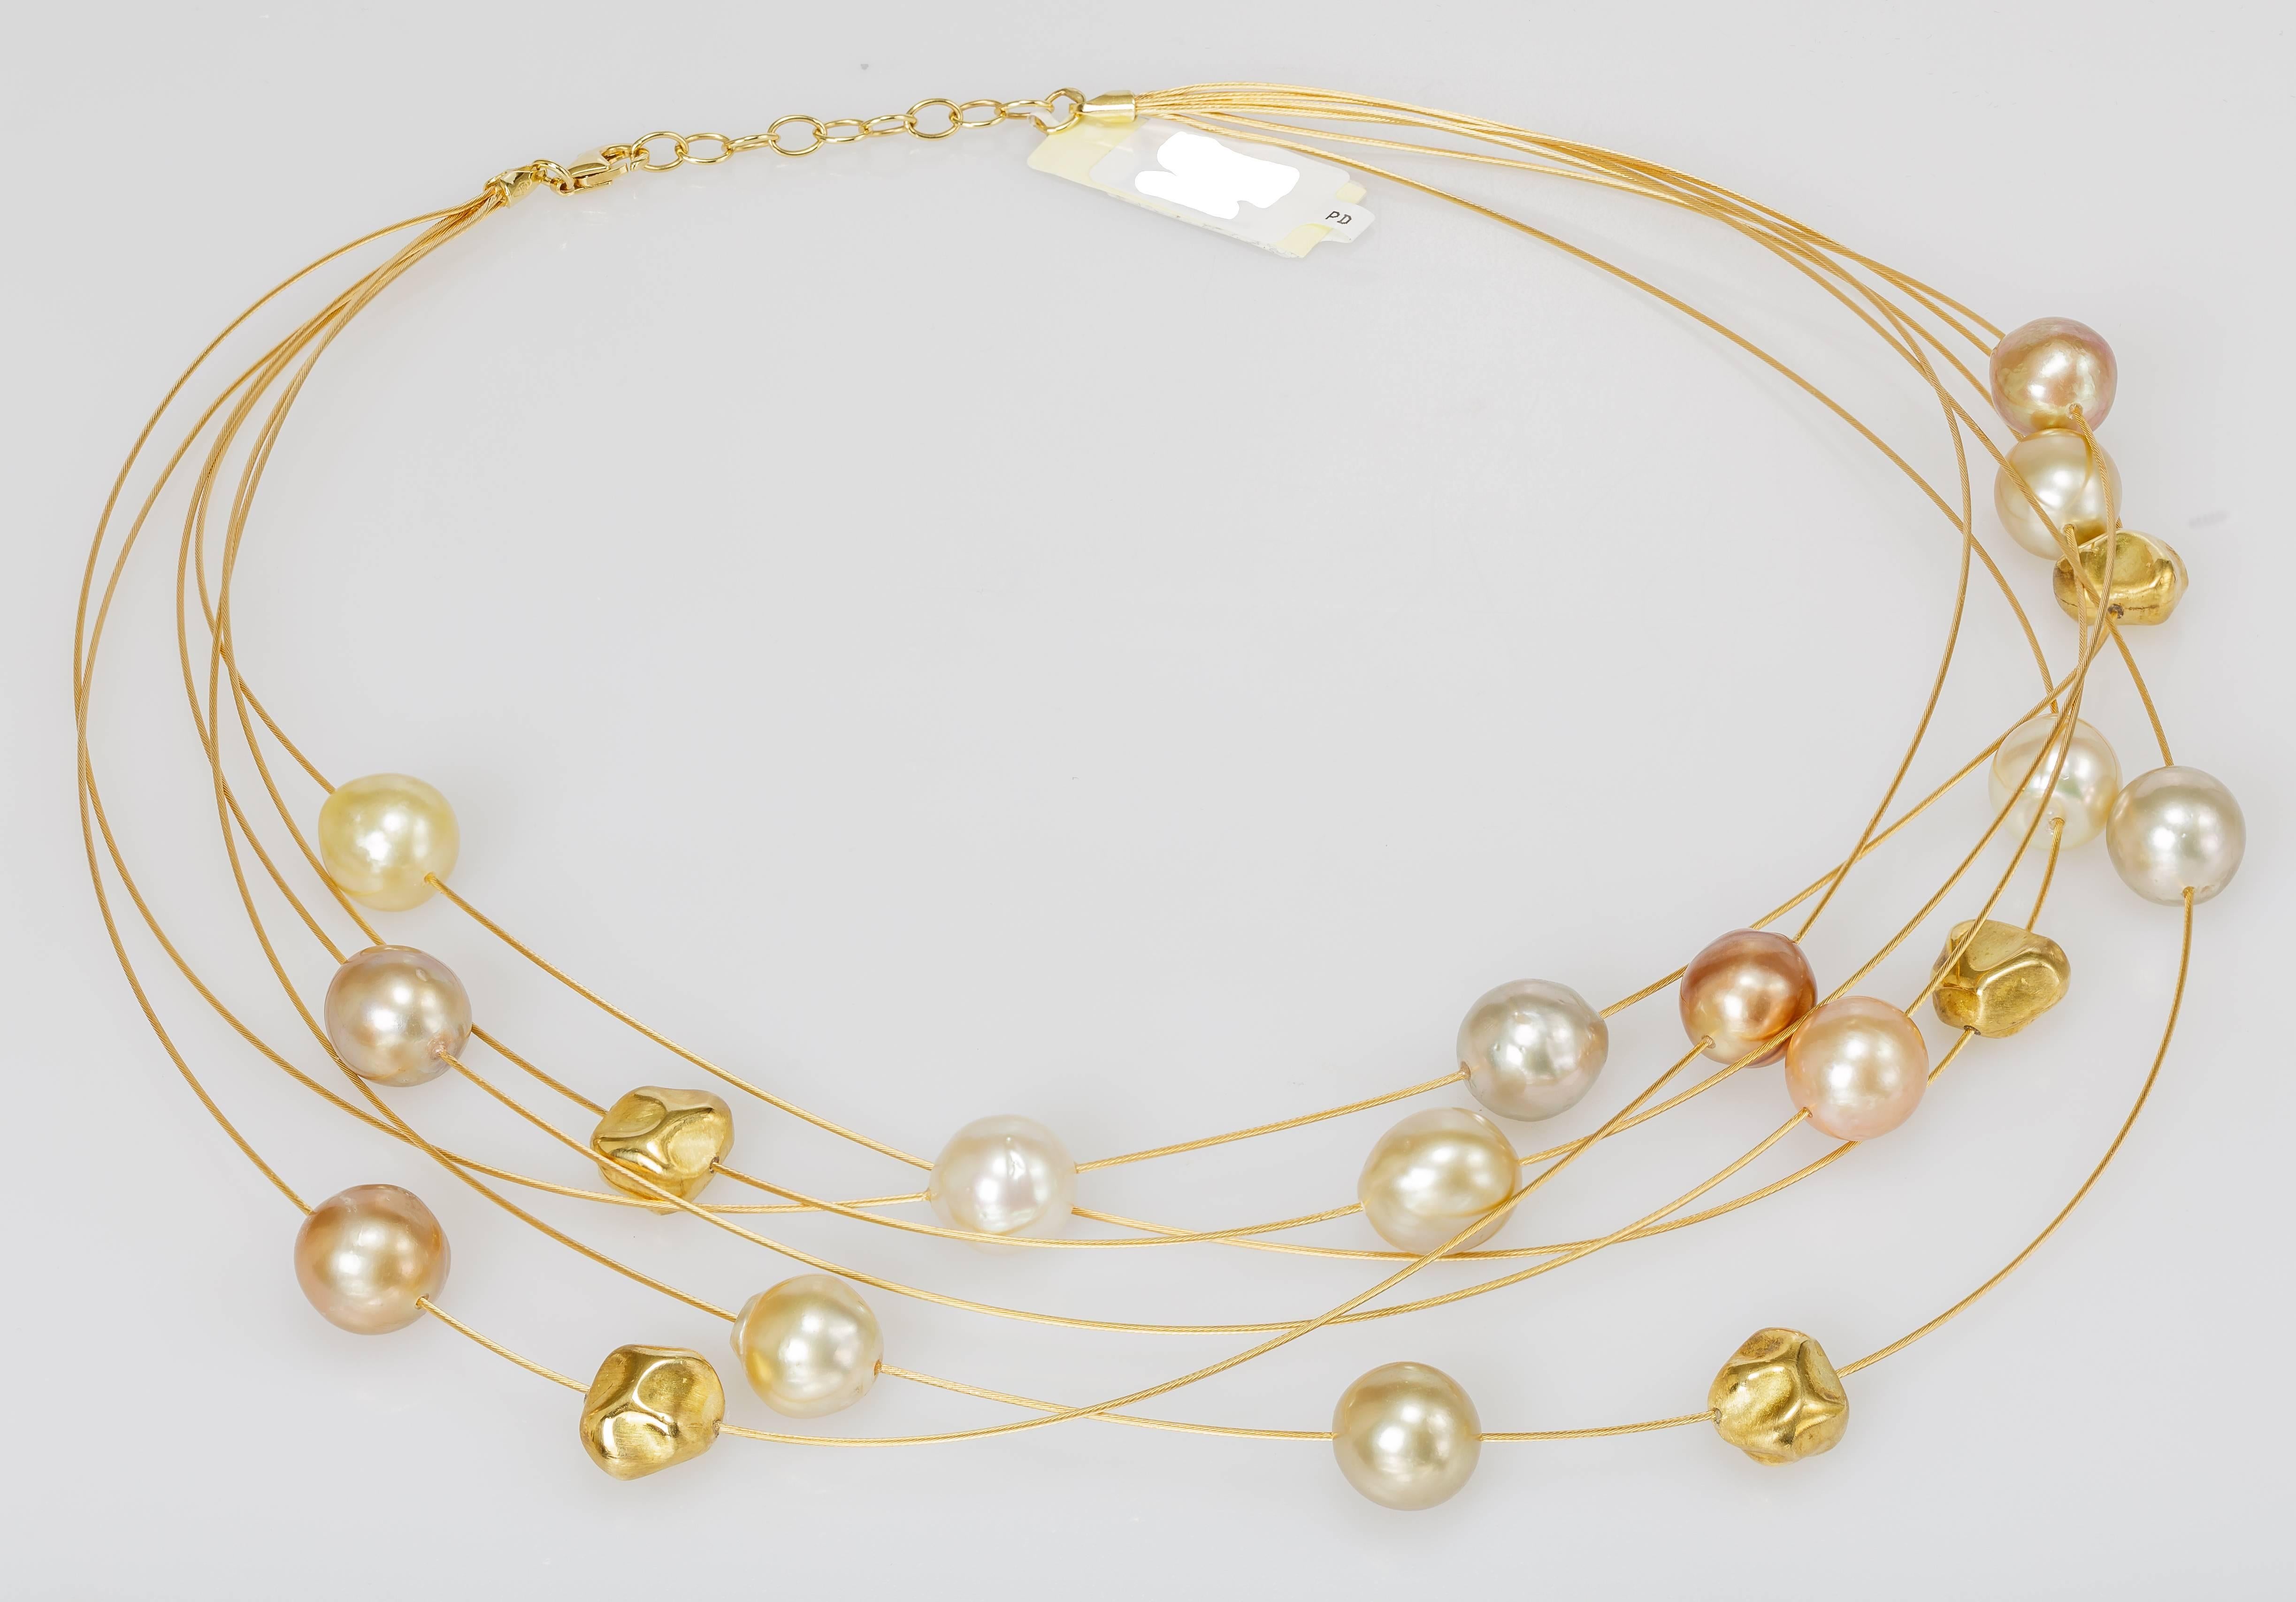 This Yvel multi-row necklace features multicolored South Sea pearls on thin 18k yellow gold wires. The necklace measures 16 inches long.